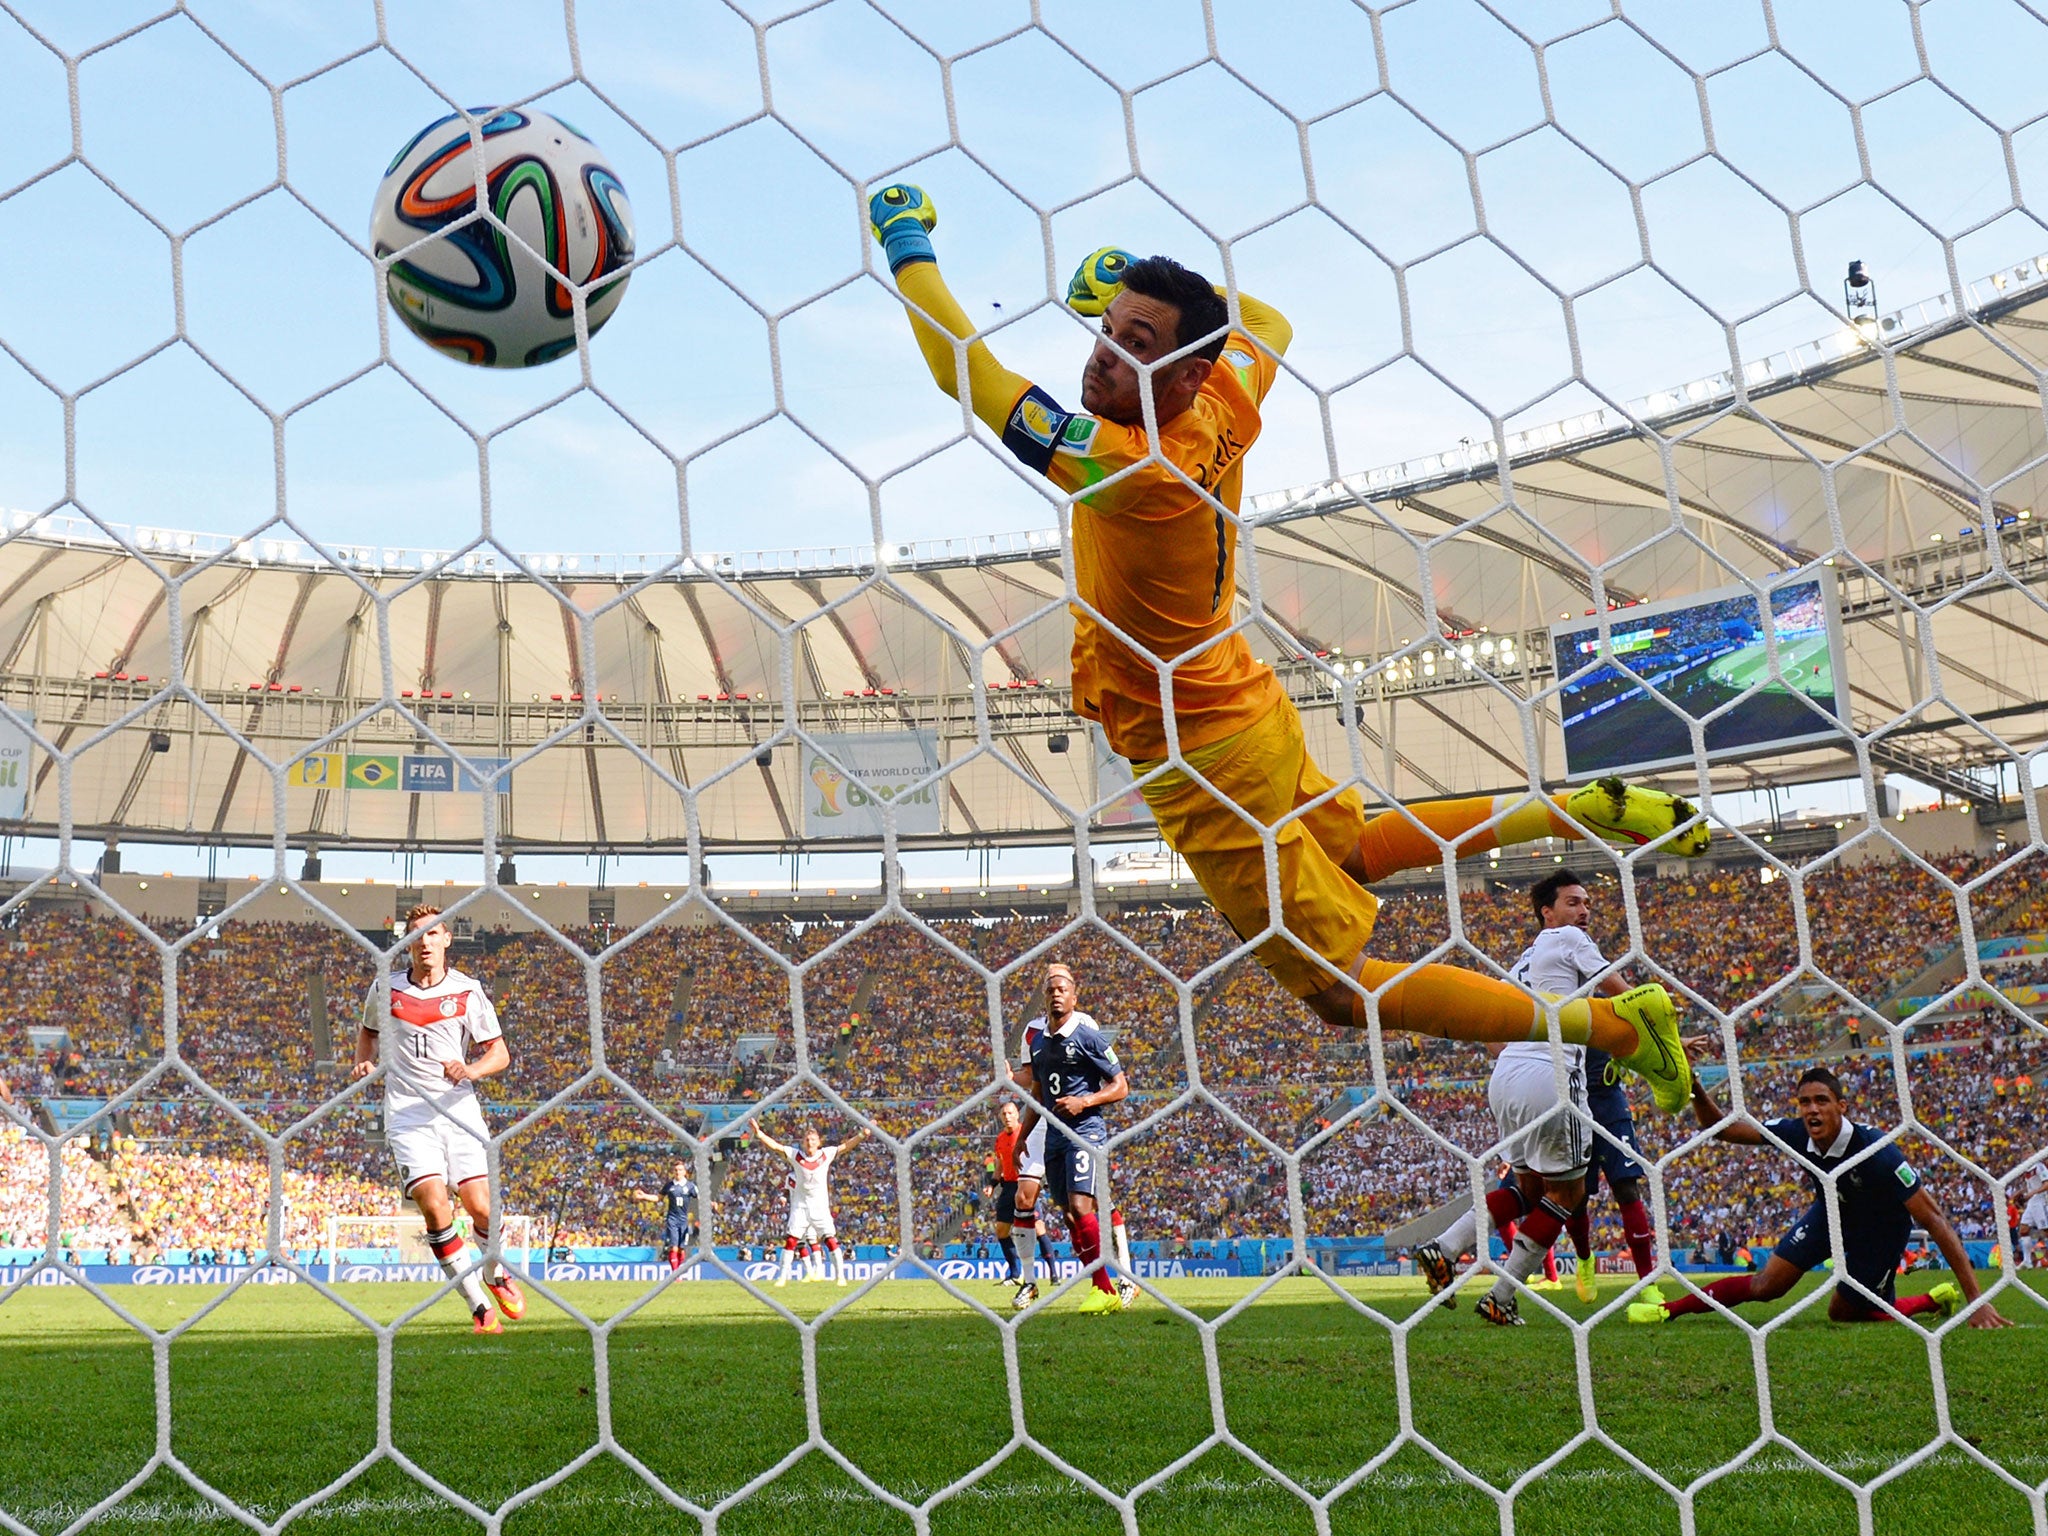 Mats Hummels heads past Hugo Lloris for the only goal of the game